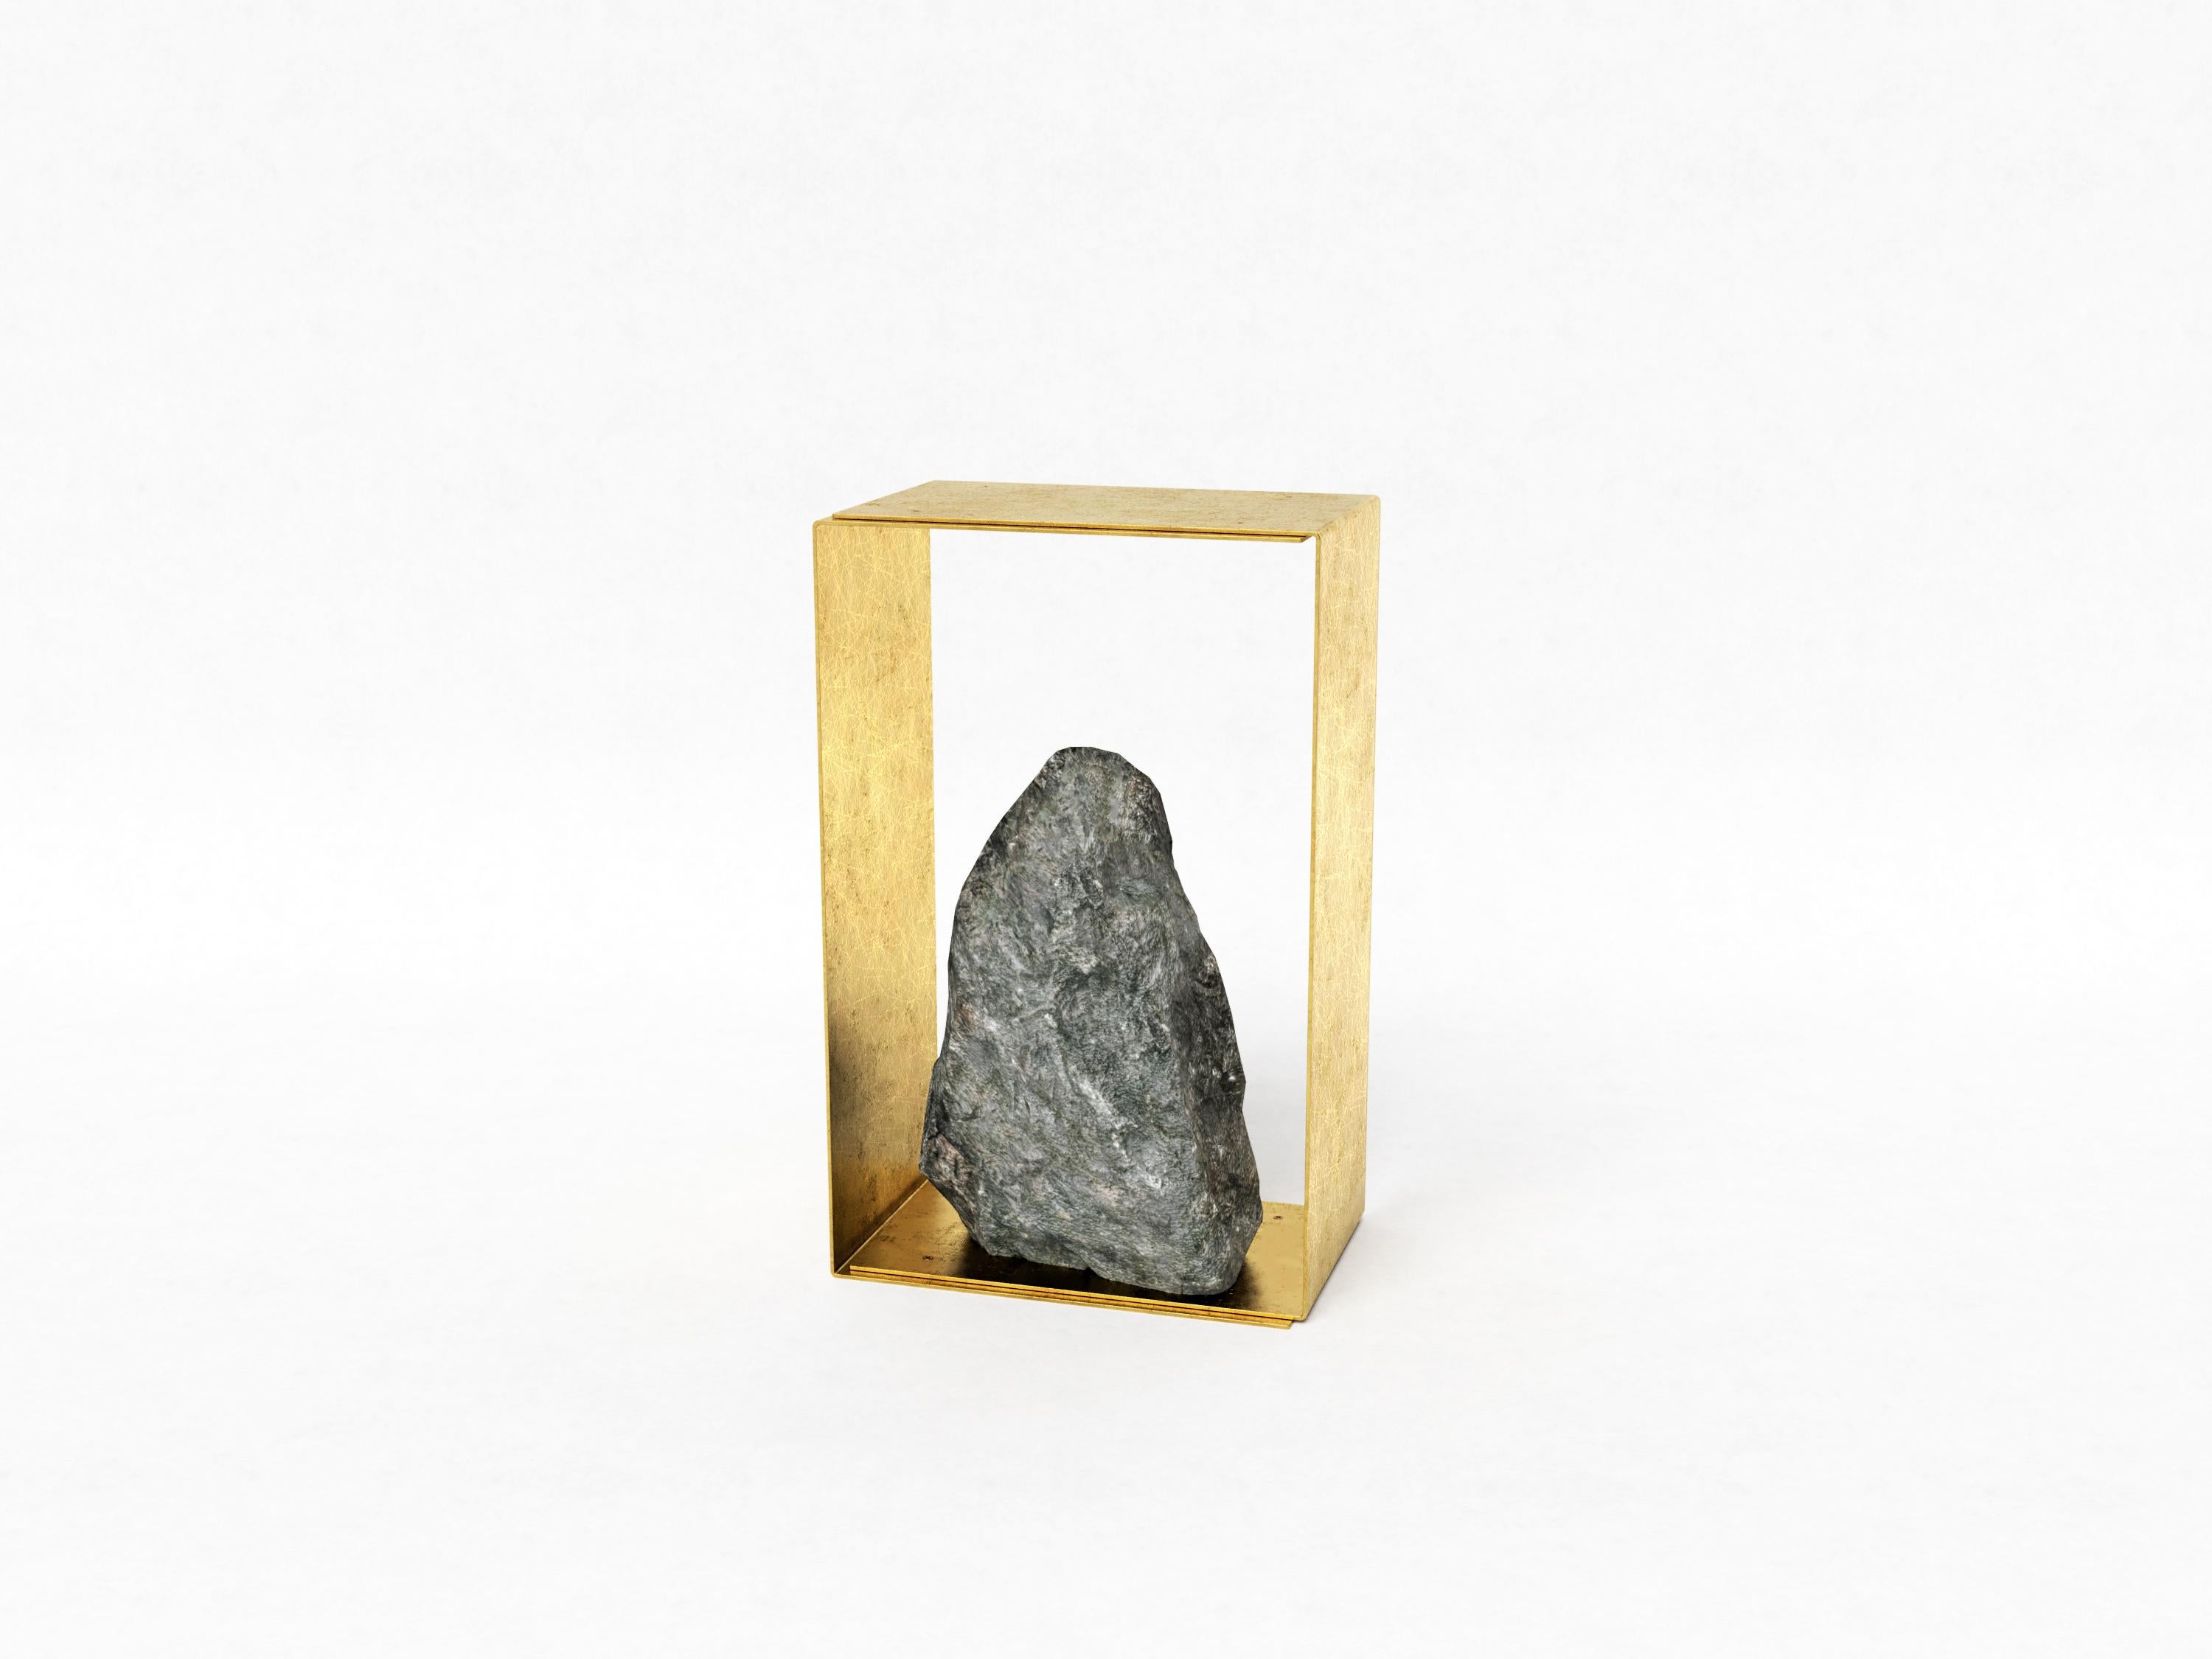 Hand brushed brass and granite side table by Batten and Kamp
Signed
Limited edition of 12 + 2 AP
Shelter to Ground collection
Dimensions: W 35 x D 23 x H 55 cm
Materials: Hand brushed brass and granite
Each unique

The stone is different